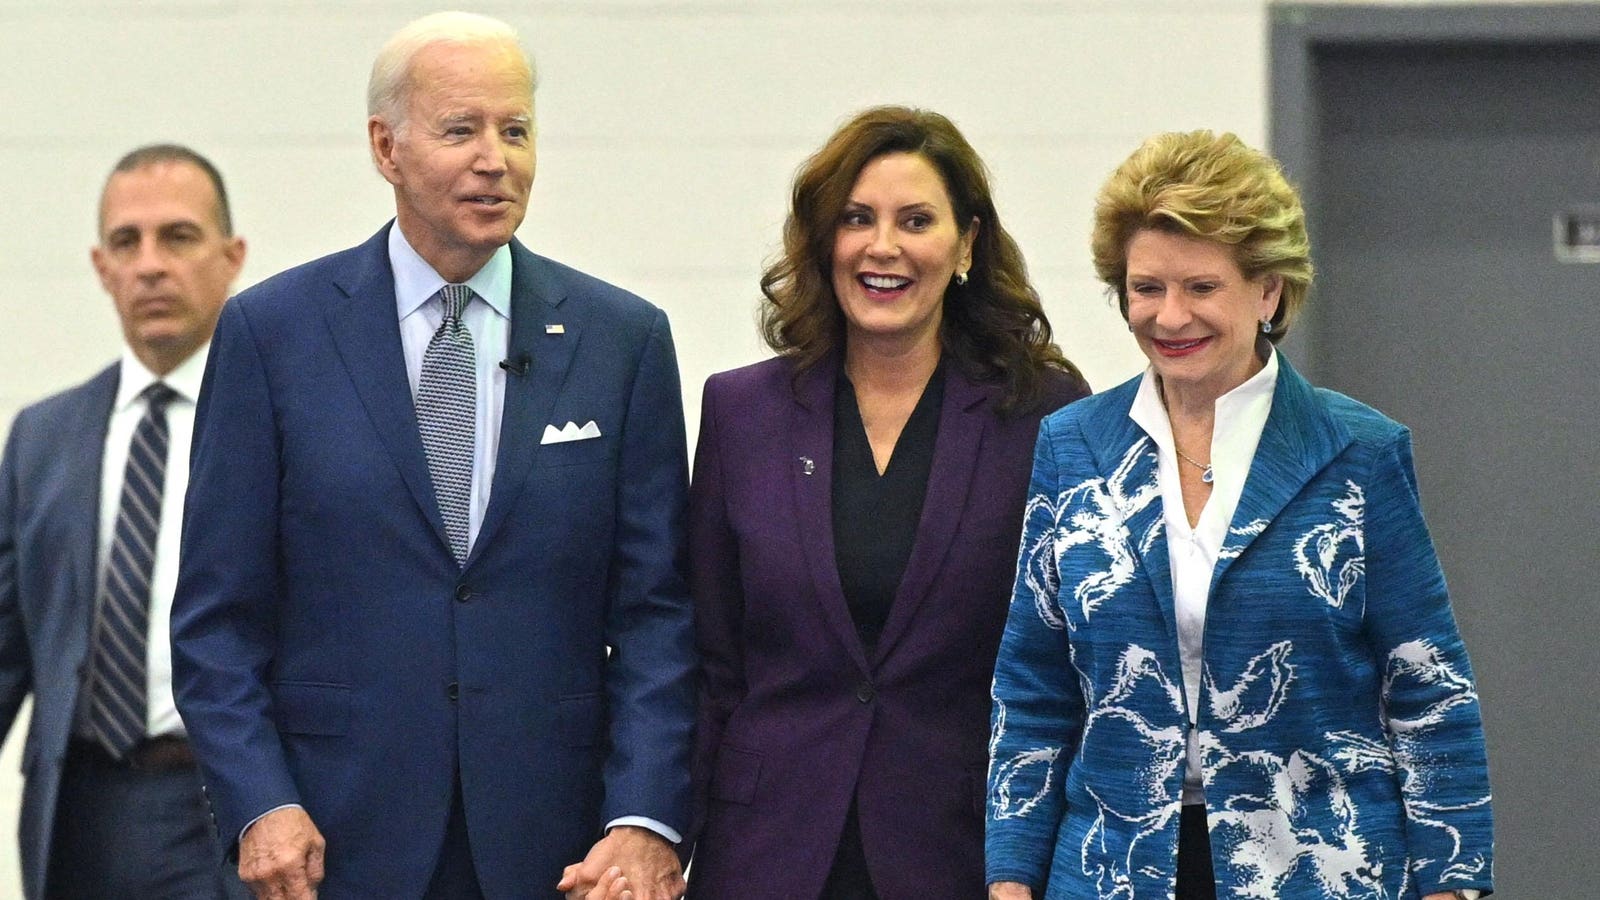 ‘Don’t Think It Would Hurt’ If Biden Took Cognitive Test, Michigan Gov. Whitmer Says